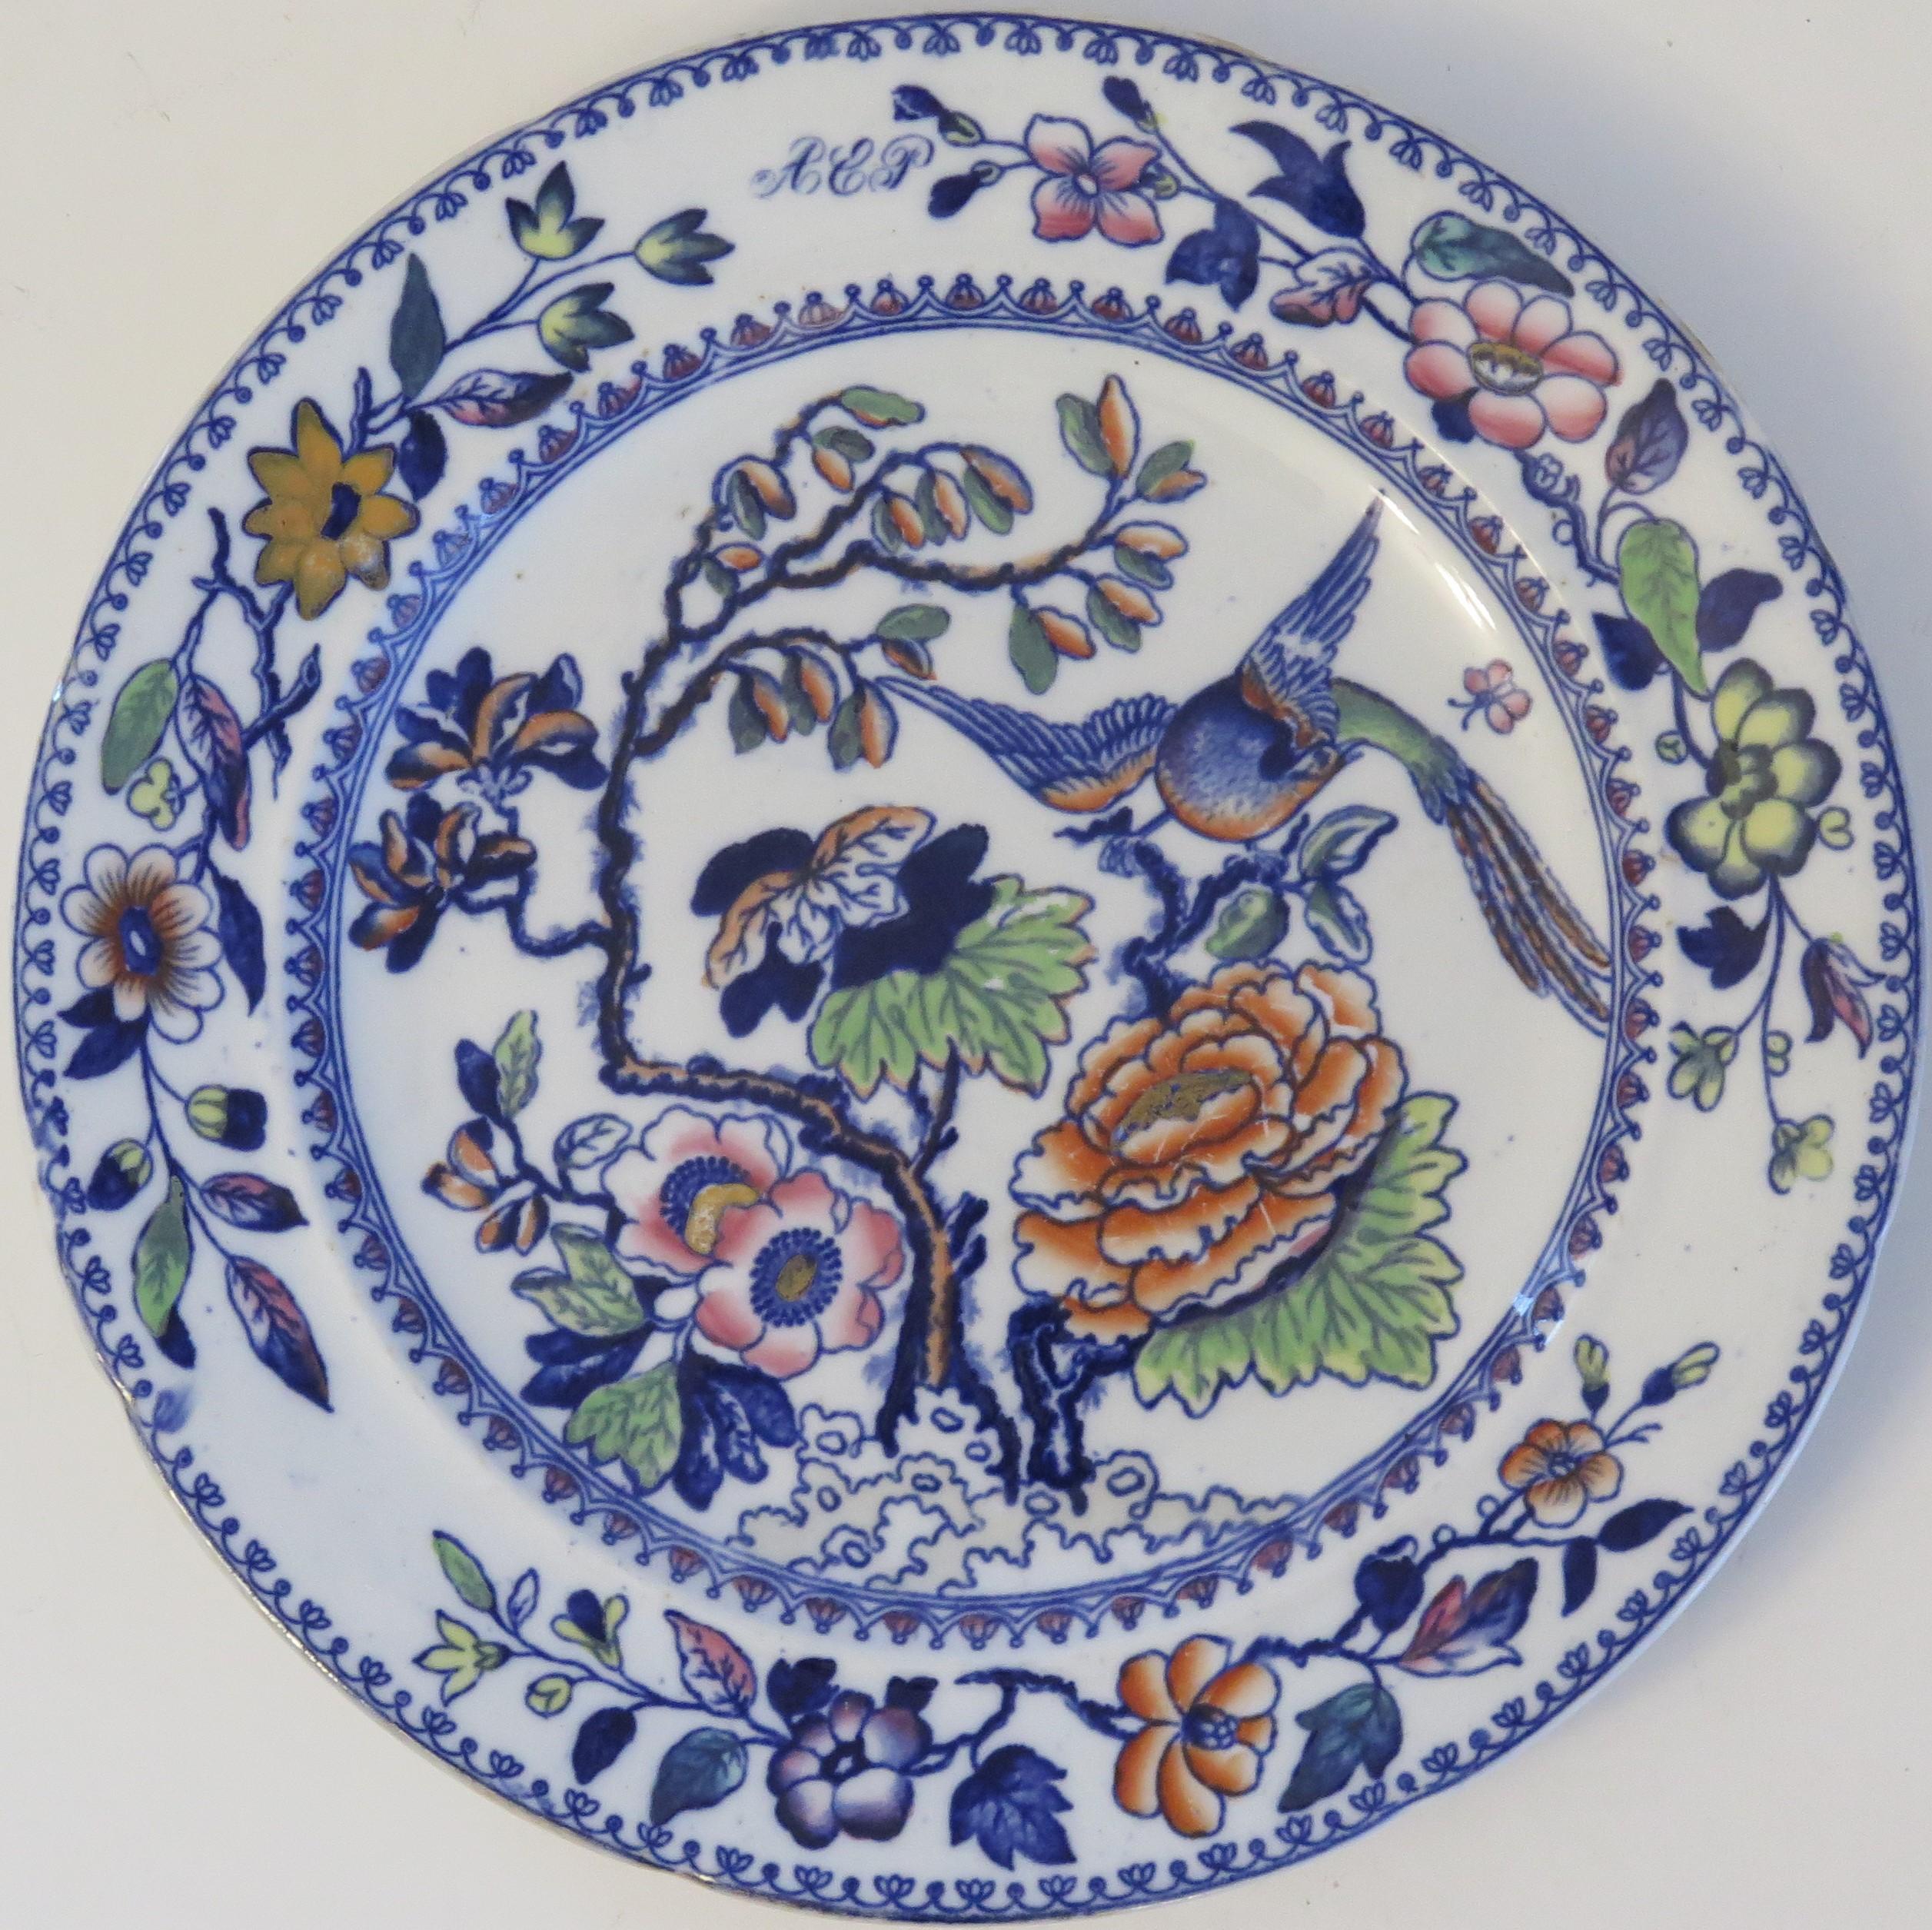 This is a good Mason’s ironstone large dinner plate produced at the time when Mason's was owned and controlled by George L Ashworth and Brothers after the bankruptcy of C J Mason in 1848.

This large plate is decorated in a the striking